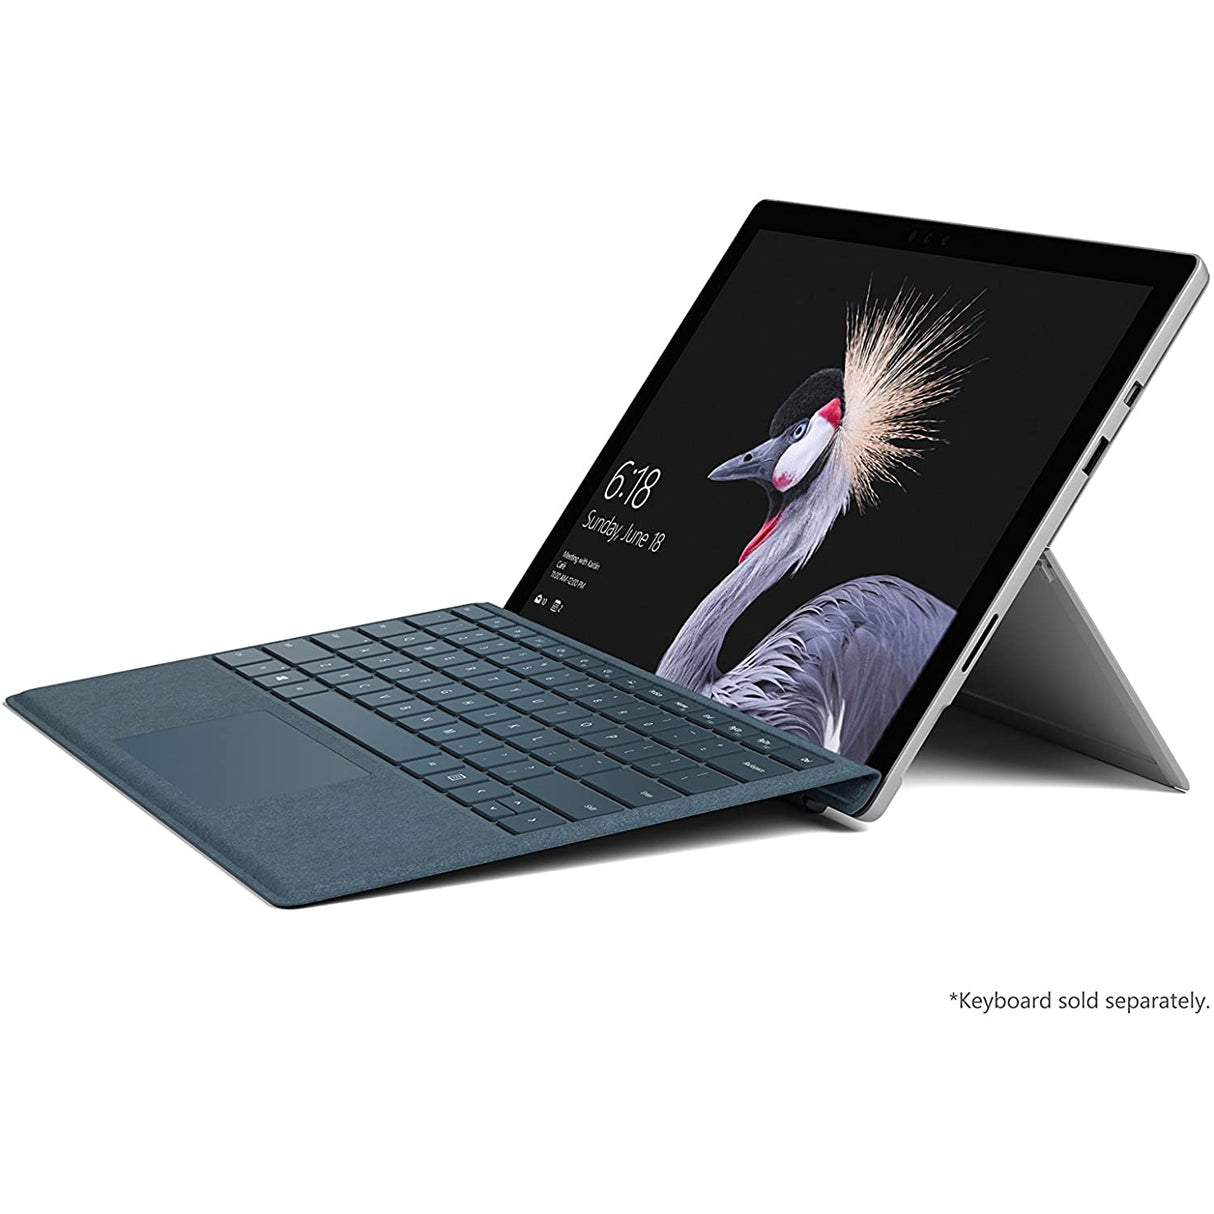 Microsoft Surface Pro 5, Intel Core i5, 2GB RAM, 128GB SSD, 1807 Tablet, 12.3" - Silver - Excellent